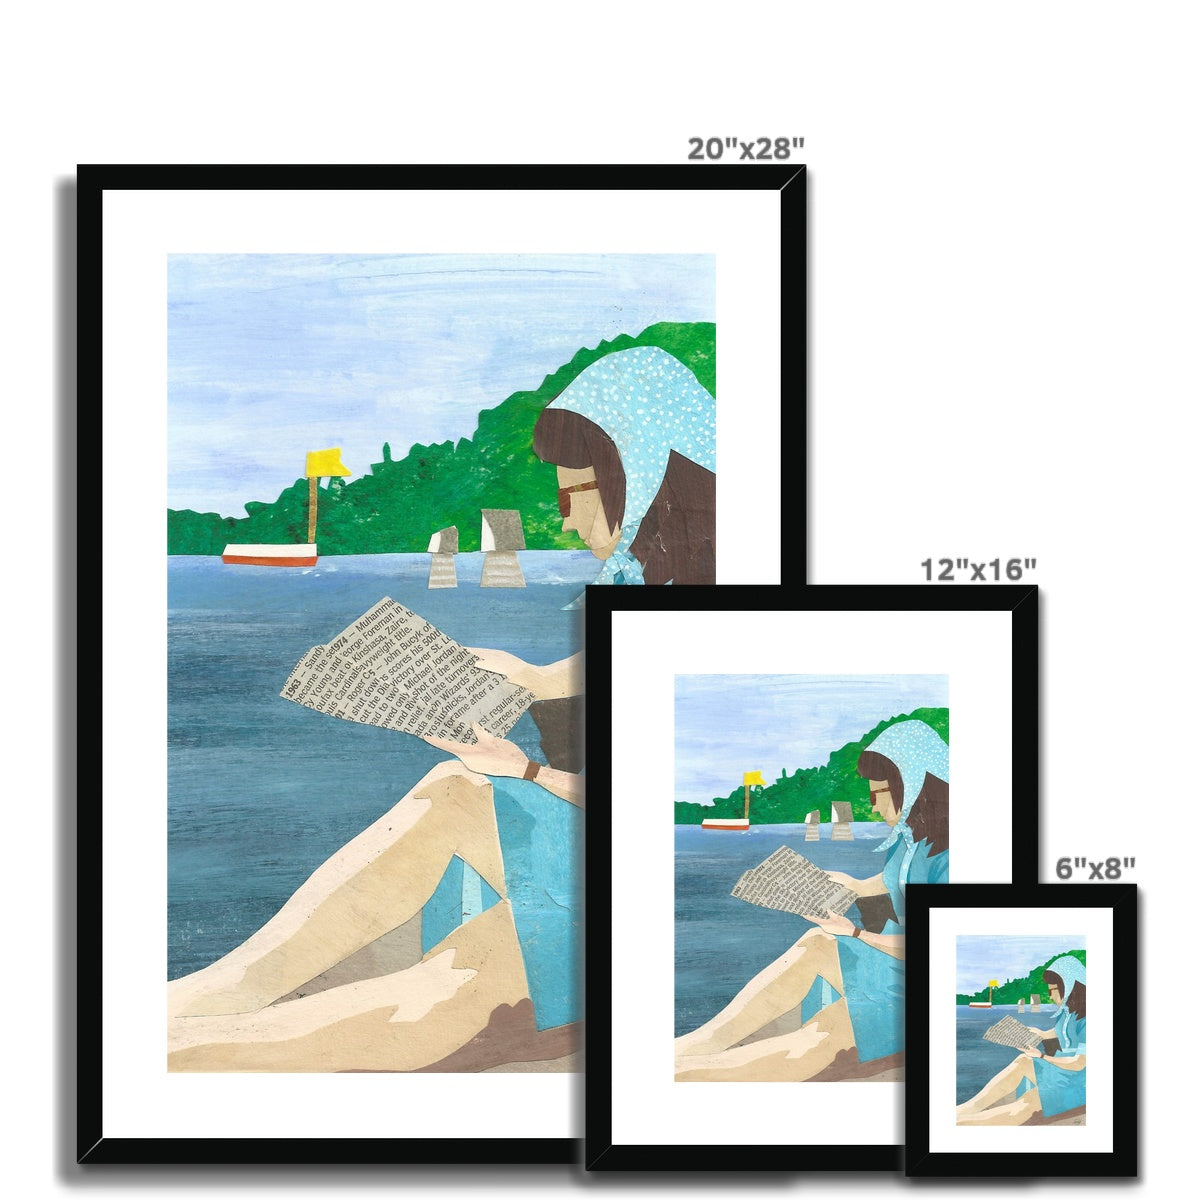 Lady of the Lake Framed & Matted Print